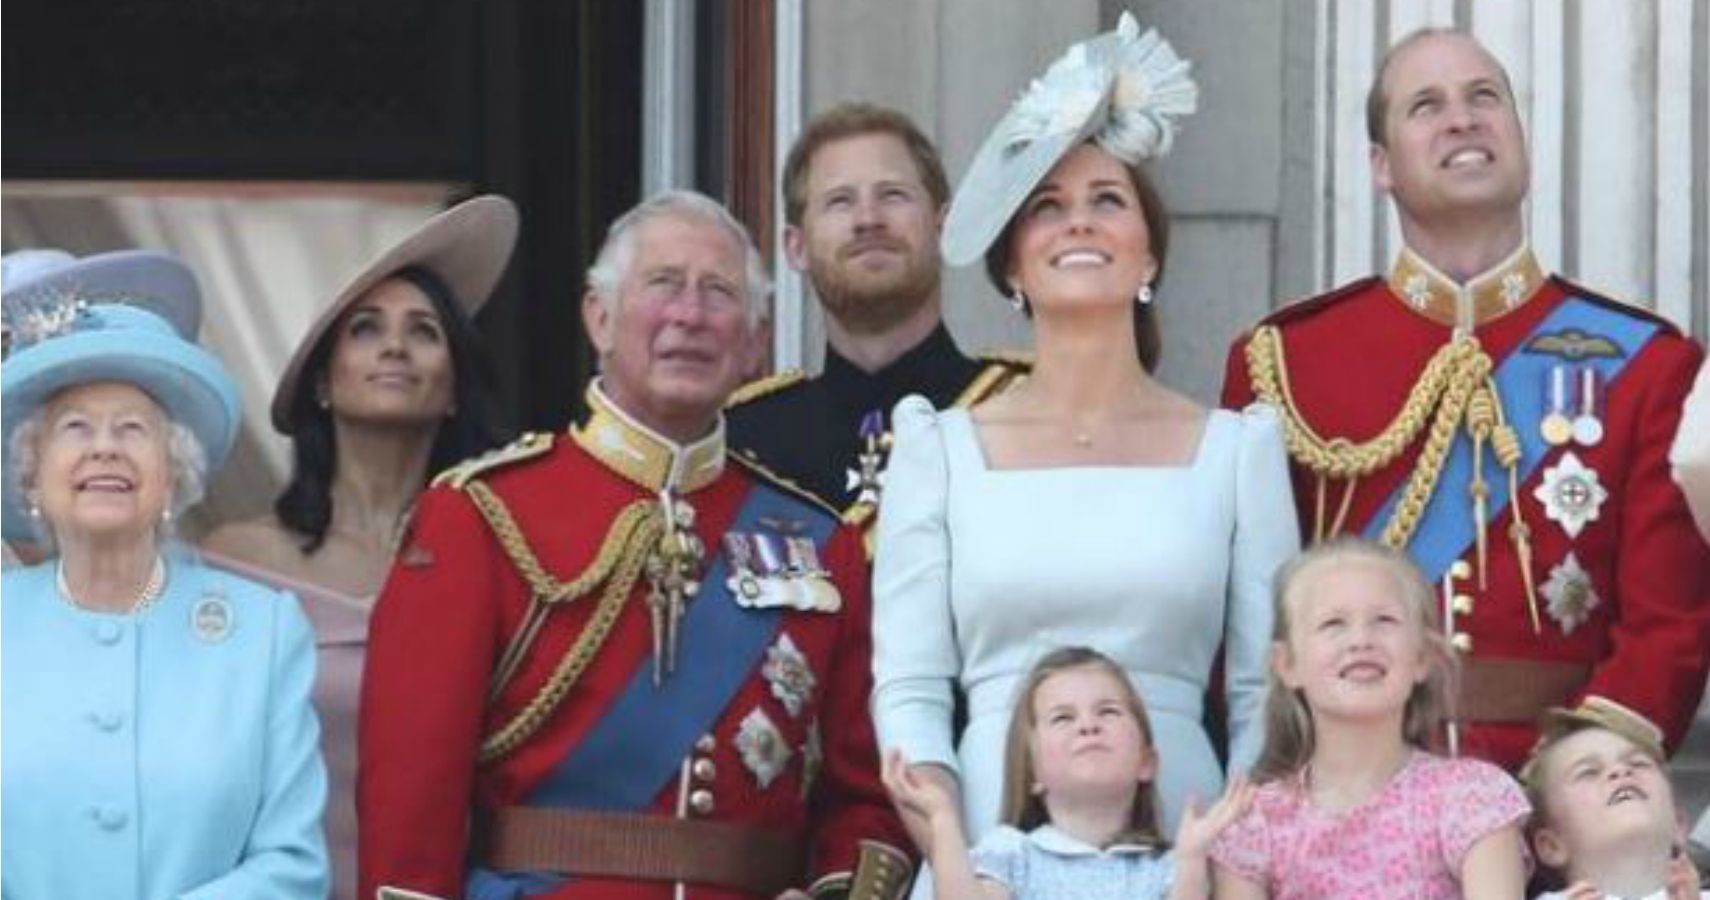 George And Charlotte Steal The Show On The Buckingham Palace Balcony